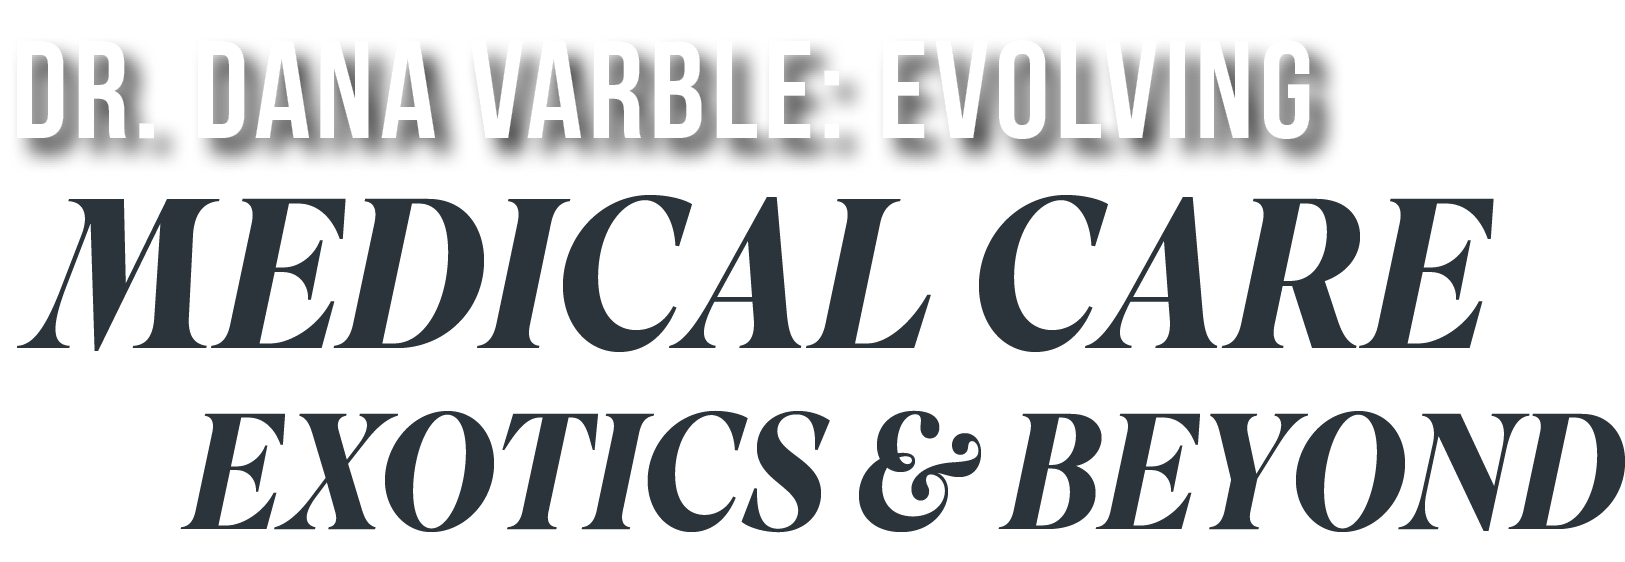 Dr Dana Varble Evolving Medical Care for Exotics and Beyond